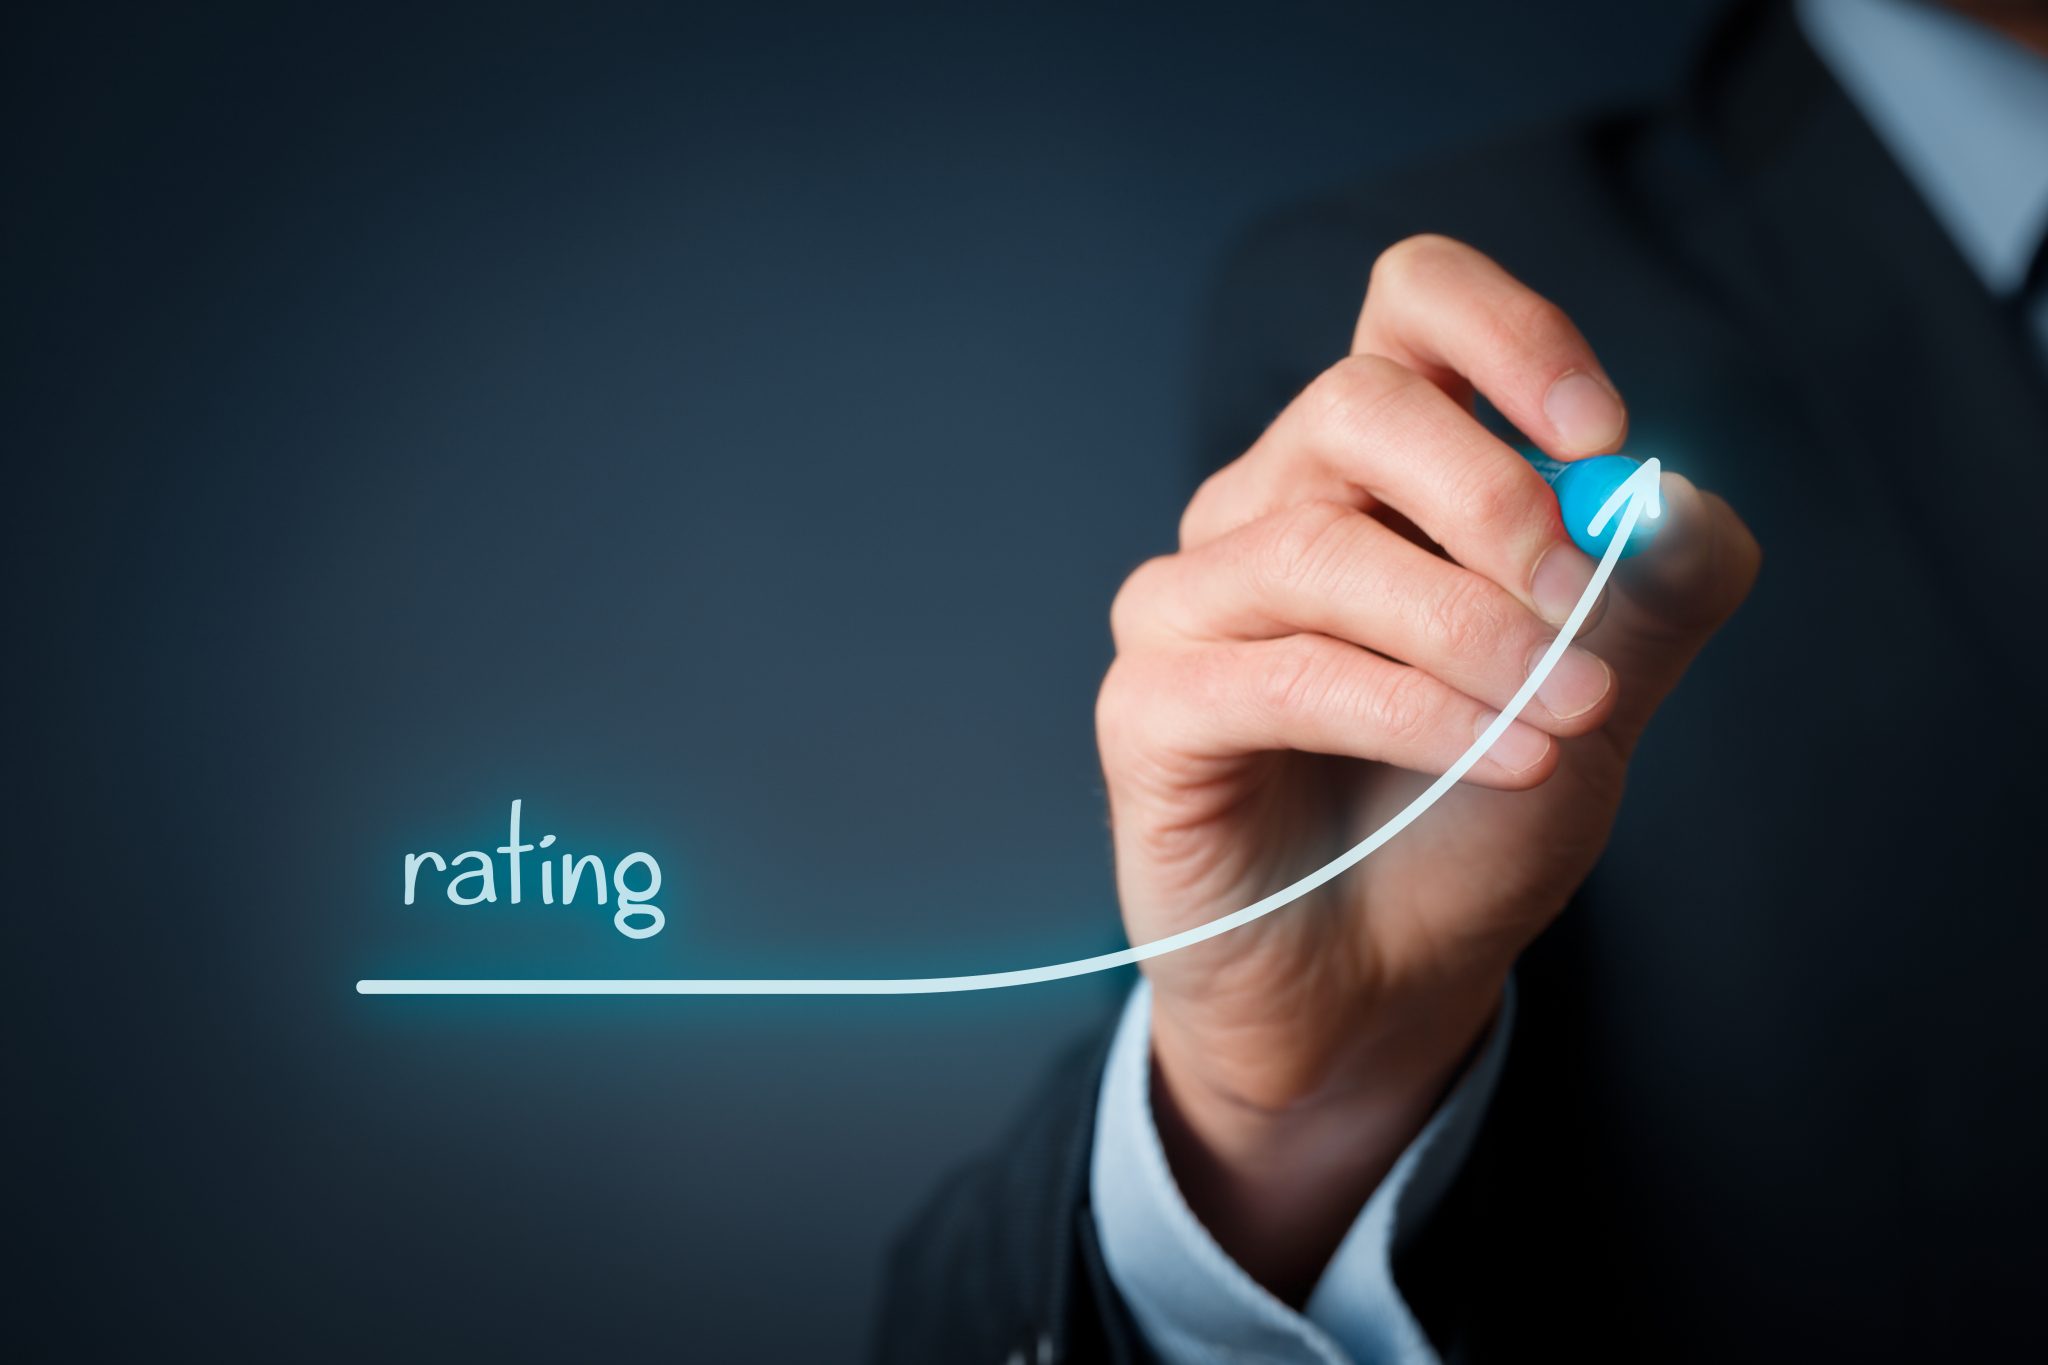 TV Ratings Explained: What Are Nielsen Ratings?